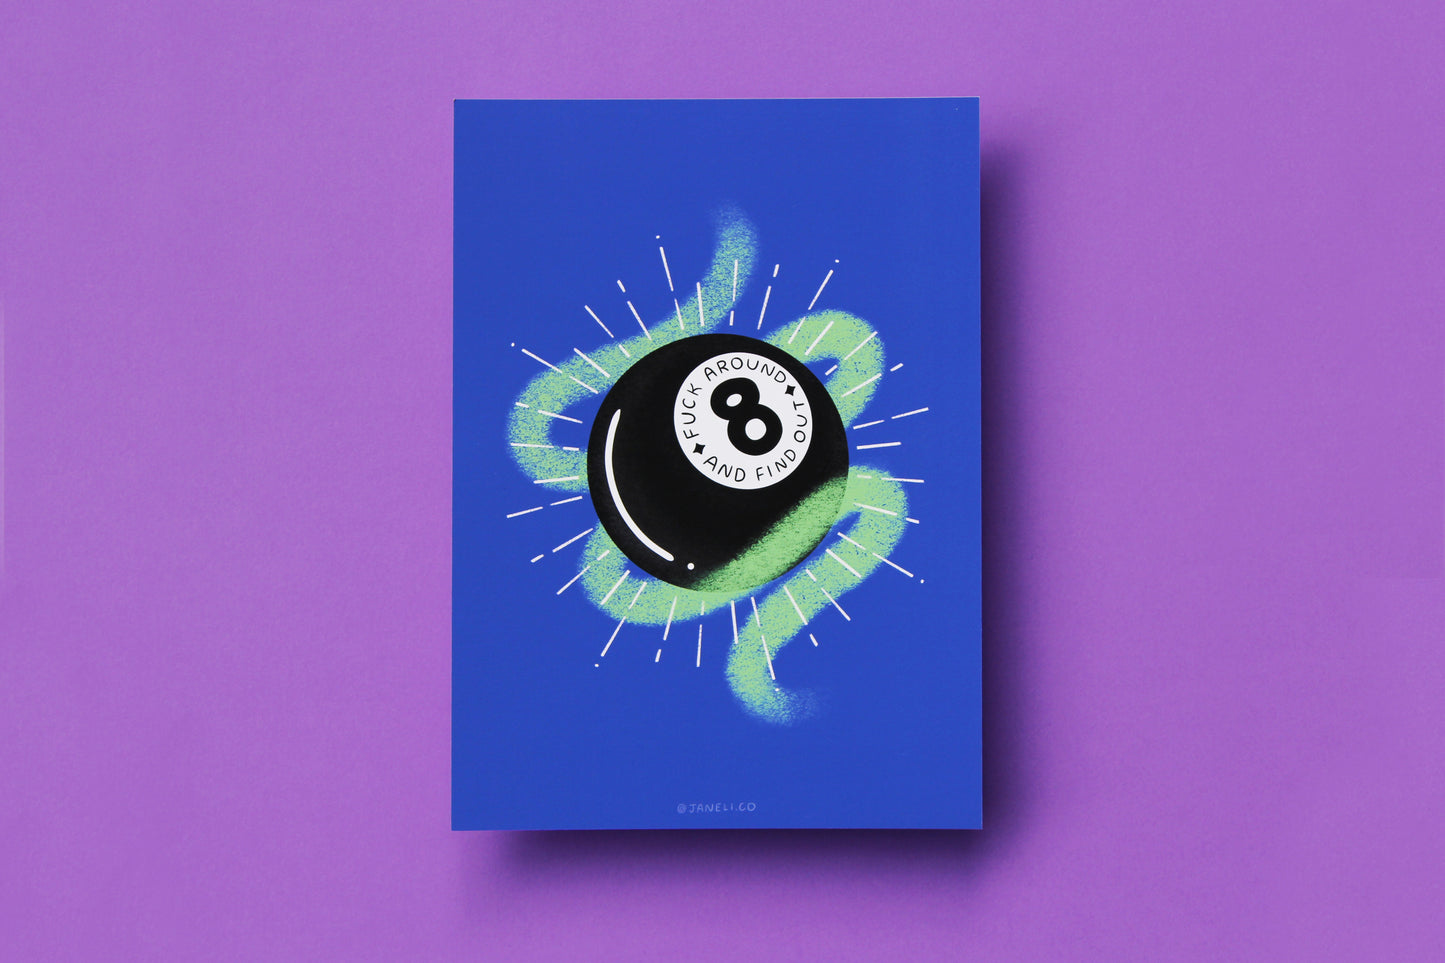 A JaneLi.Co print that says "Fuck Around and Find Out" on a magic 8 ball over a purple background.